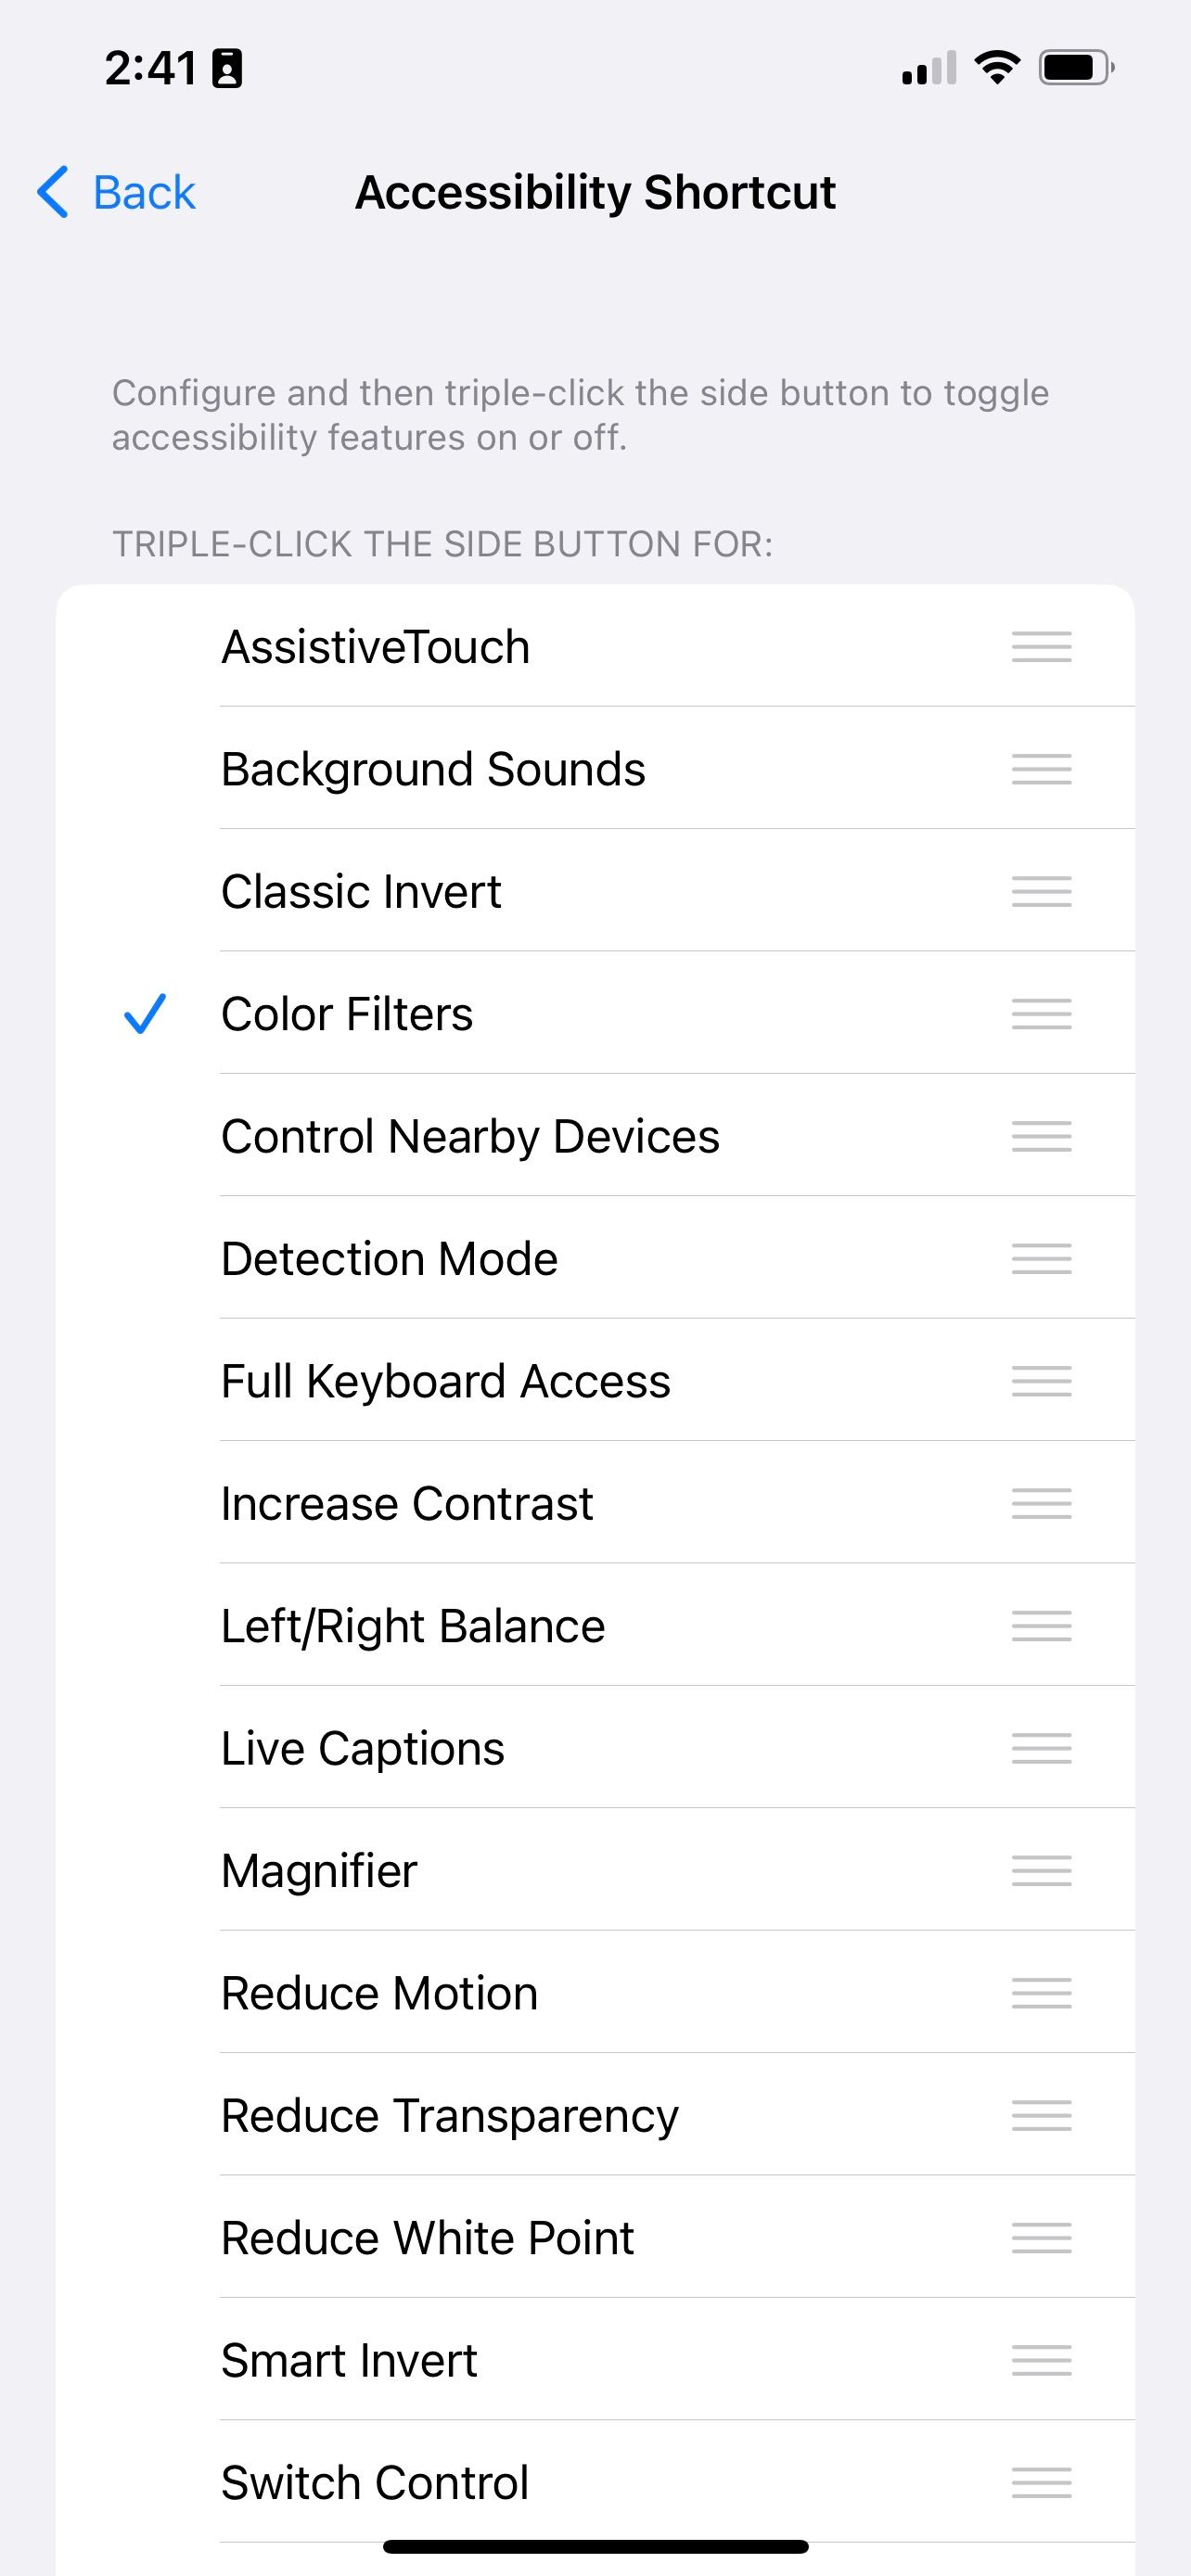 Setting color filters as the accessibility shortcut